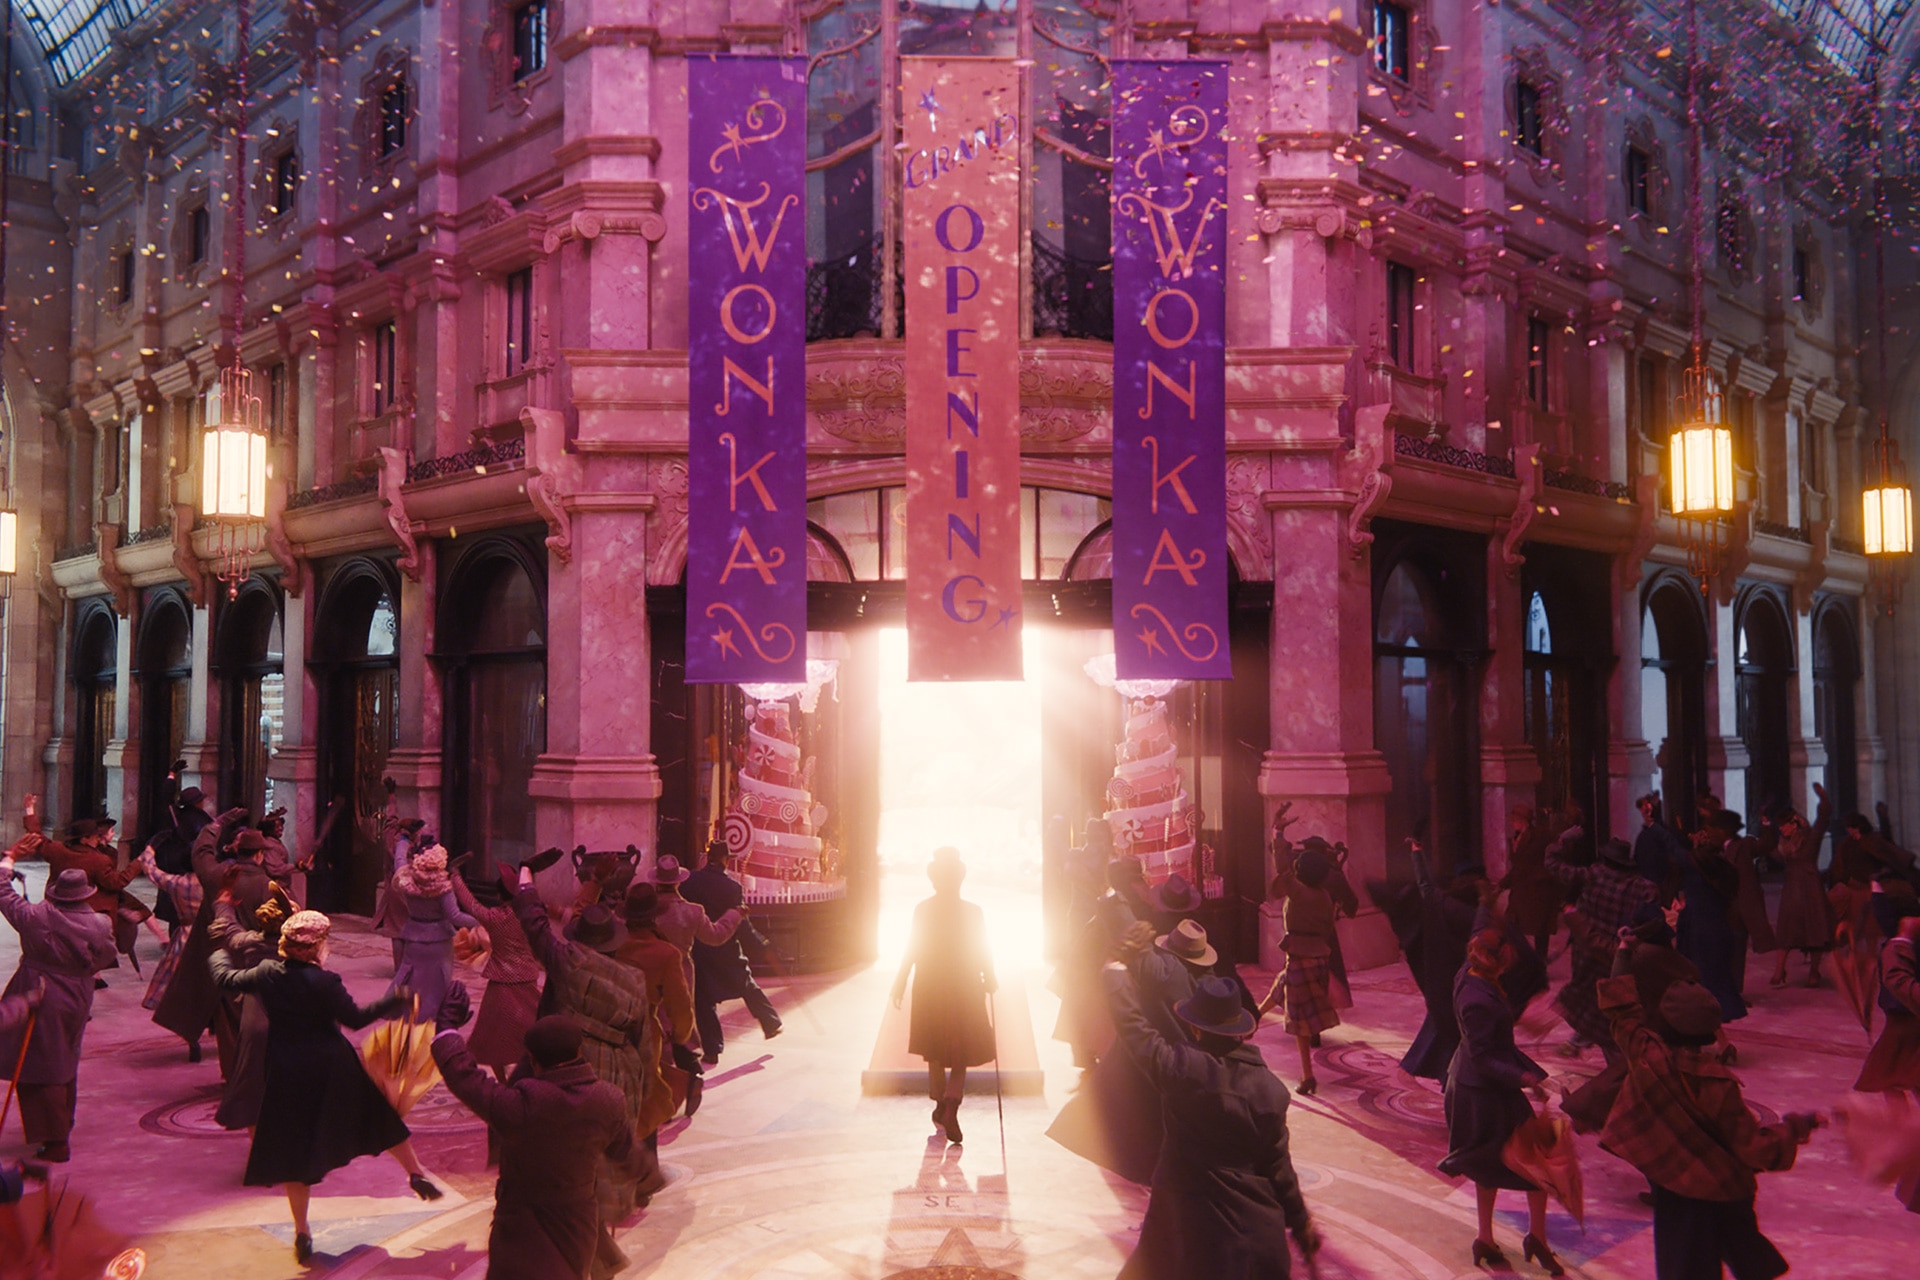 A crowd of people is gathered outside a large building decorated with three purple and gold banners that read "Wonka," "Grand Opening," "Wonka." A bright light glows from the entrance and illuminates Willy Wonka. Confetti is in the air.